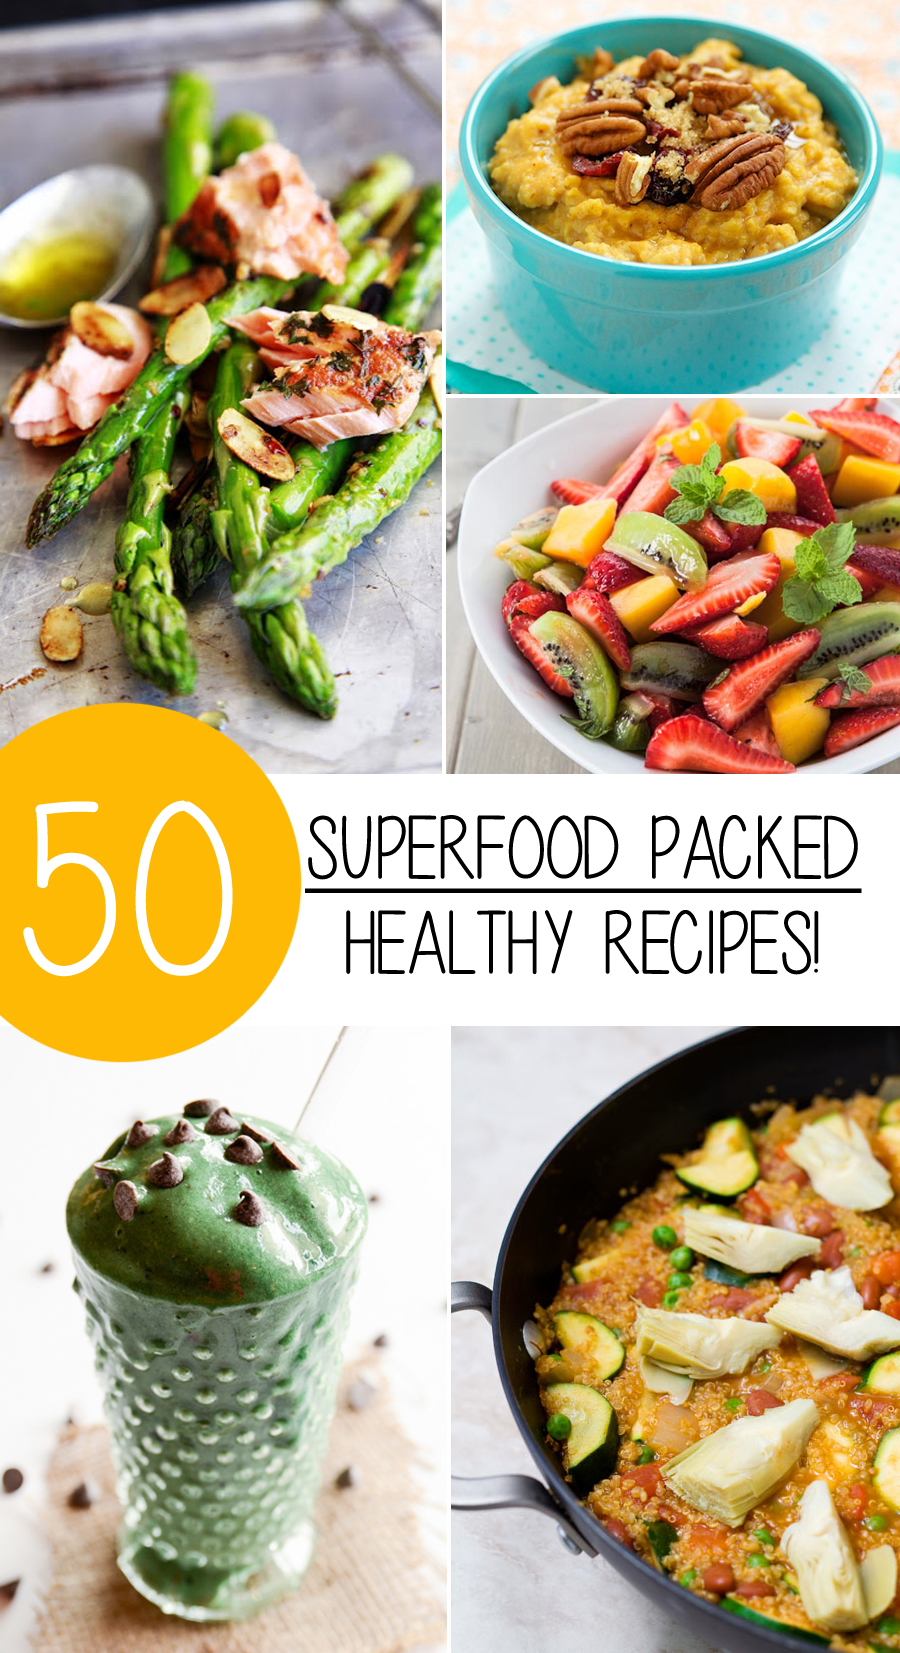 50 Superfood Packed Recipes That Will Help You Lose Weight